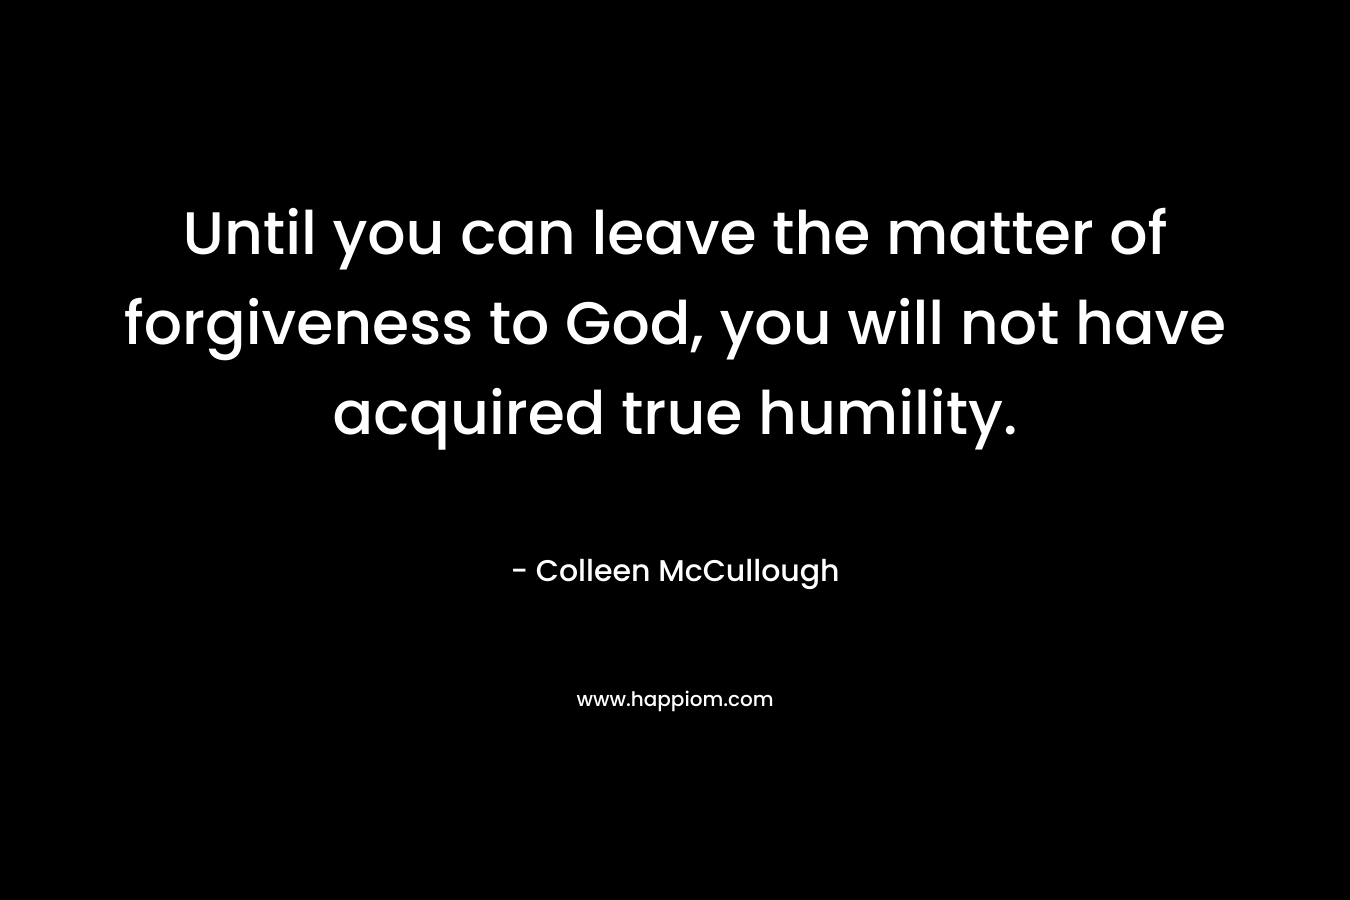 Until you can leave the matter of forgiveness to God, you will not have acquired true humility. – Colleen McCullough